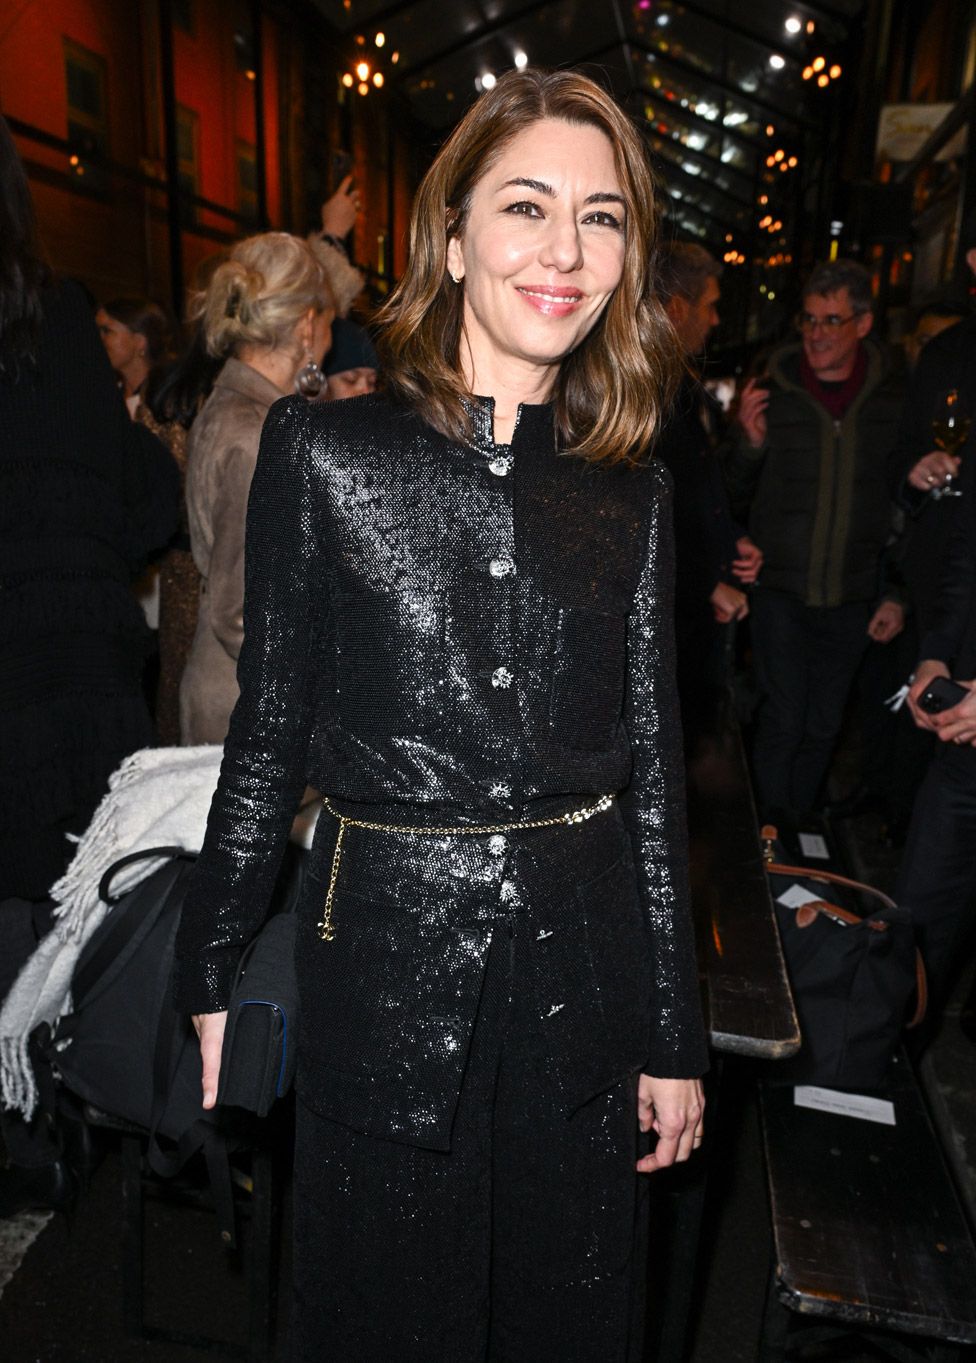 Sofia Coppola at Chanel Metiers d'Art in Manchester